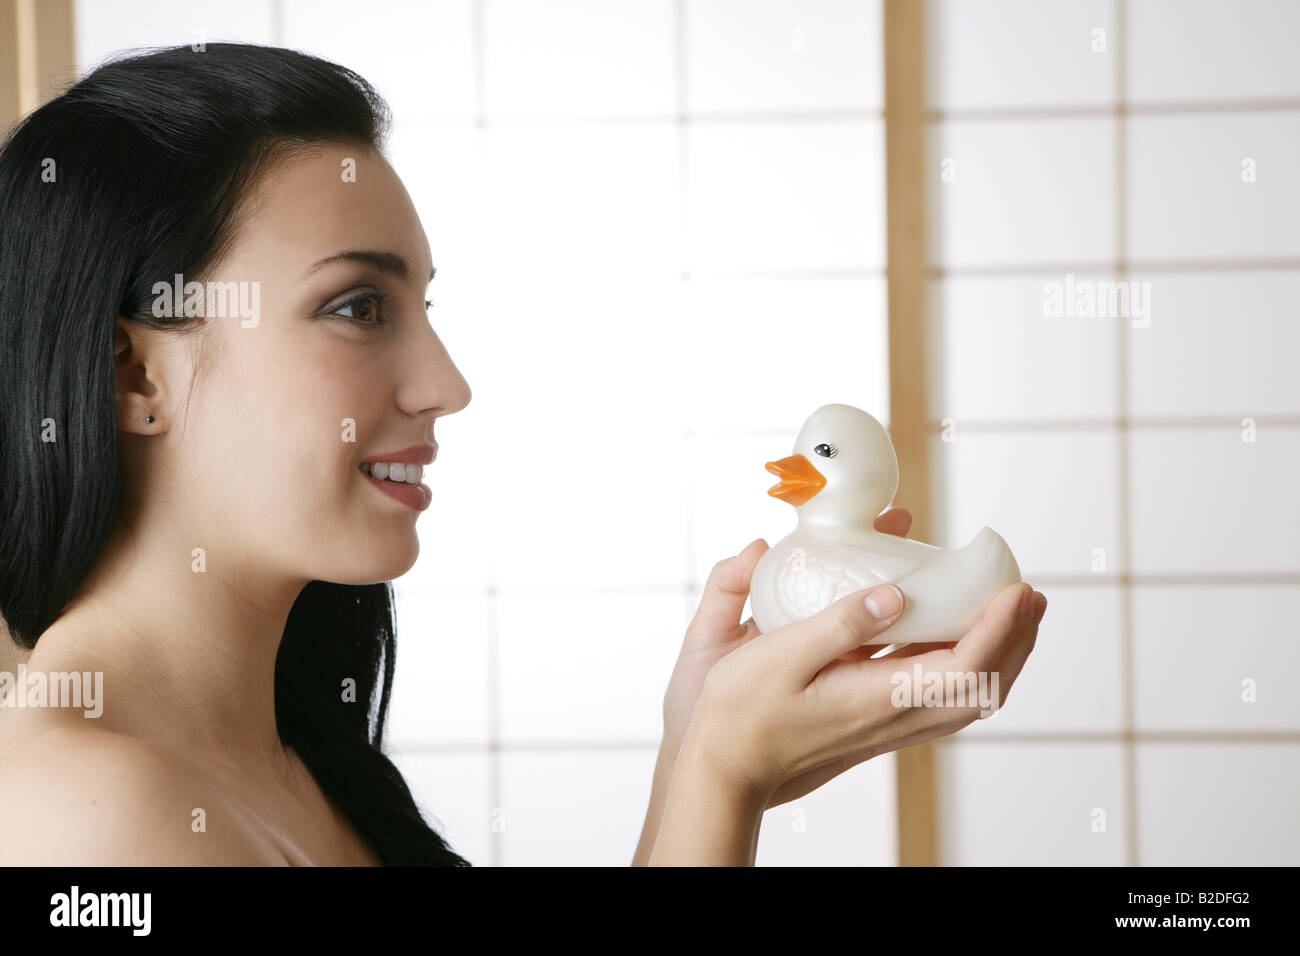 Young woman holding rubber duck. Stock Photo